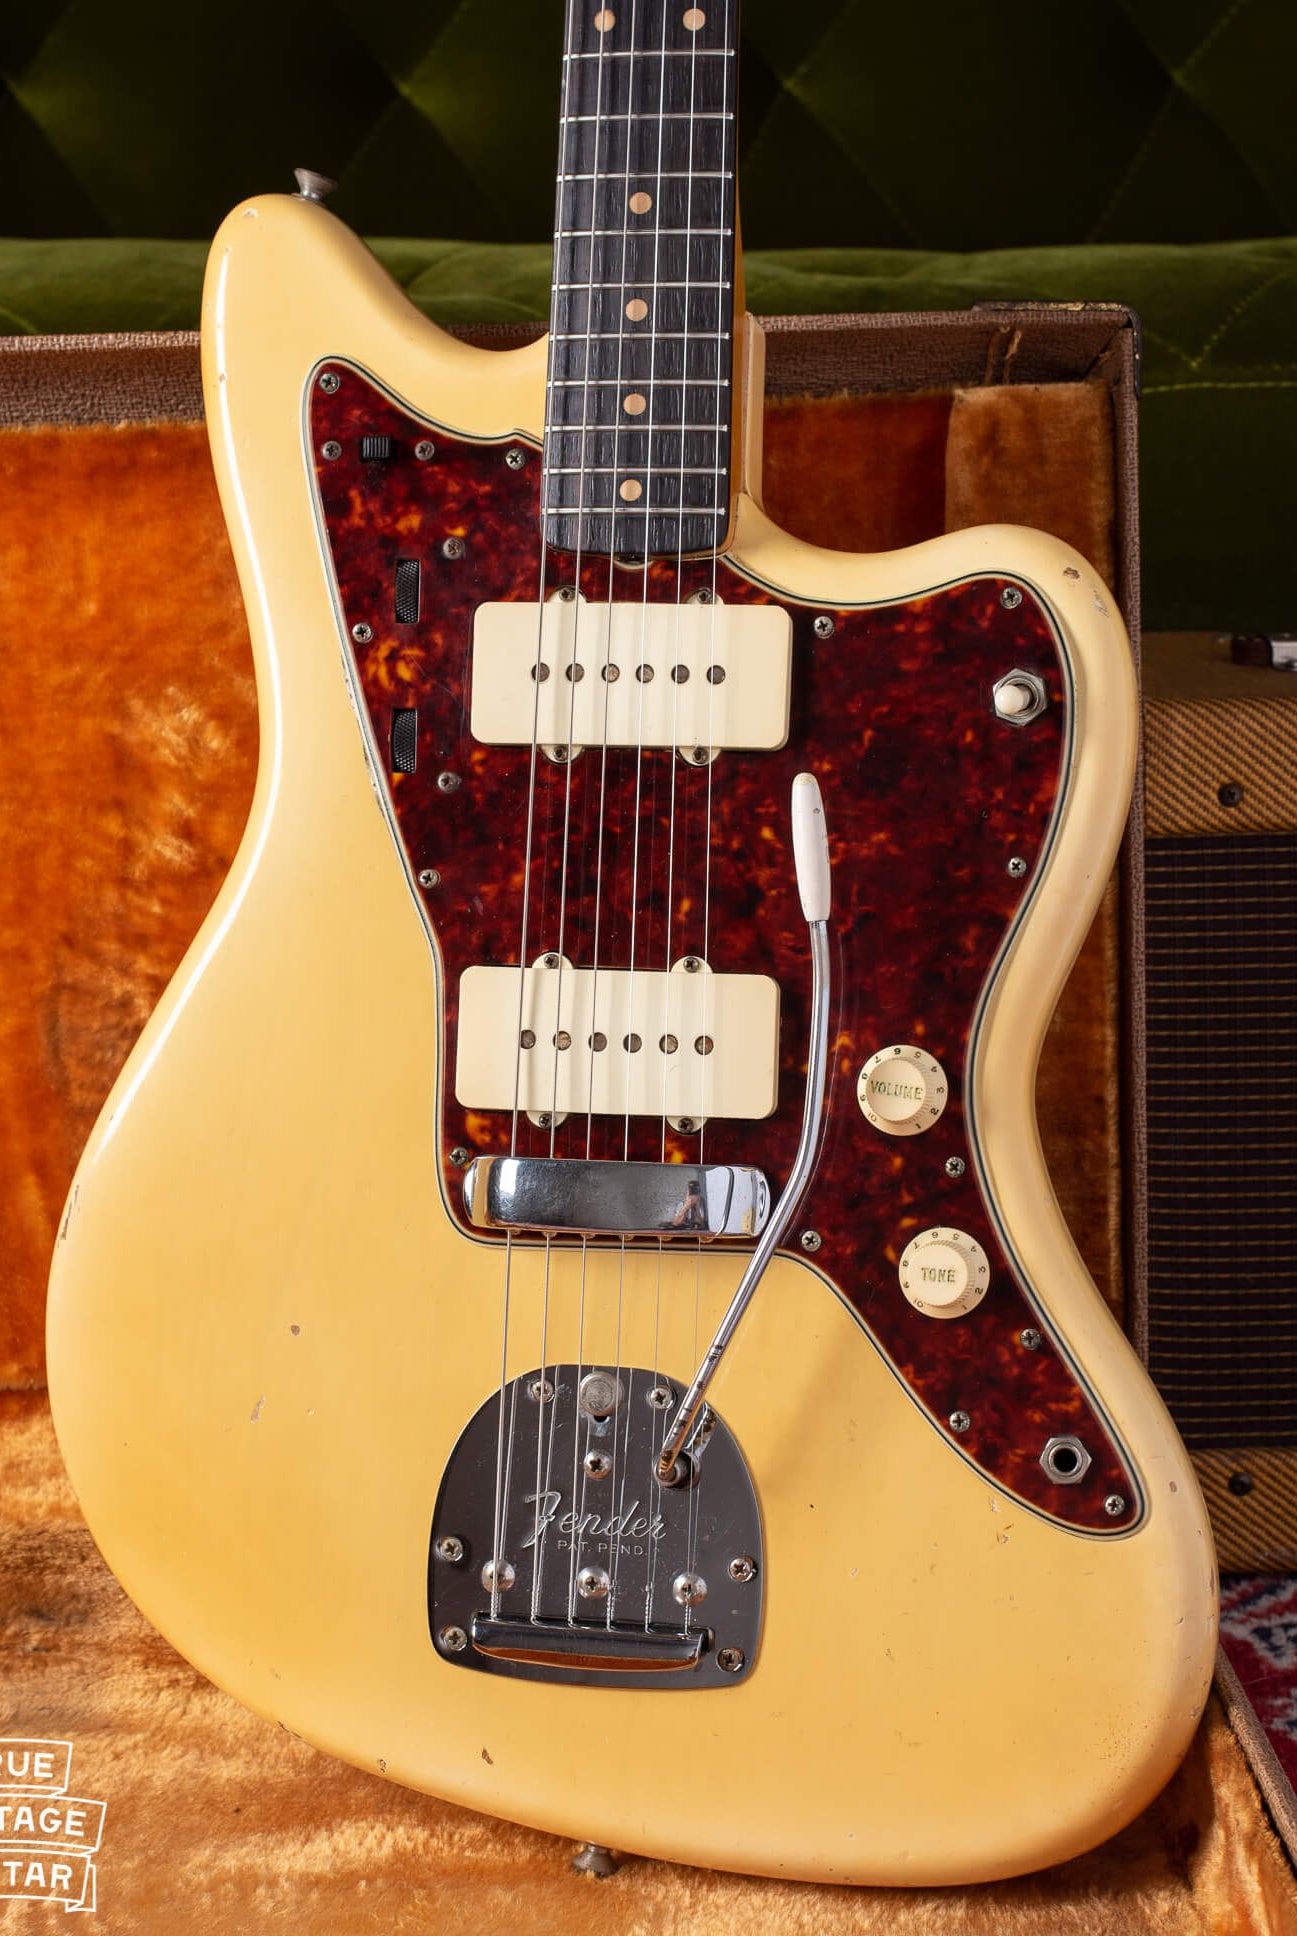 Fender Jazzmaster 1961 in Blond white cream finish with red pickguard